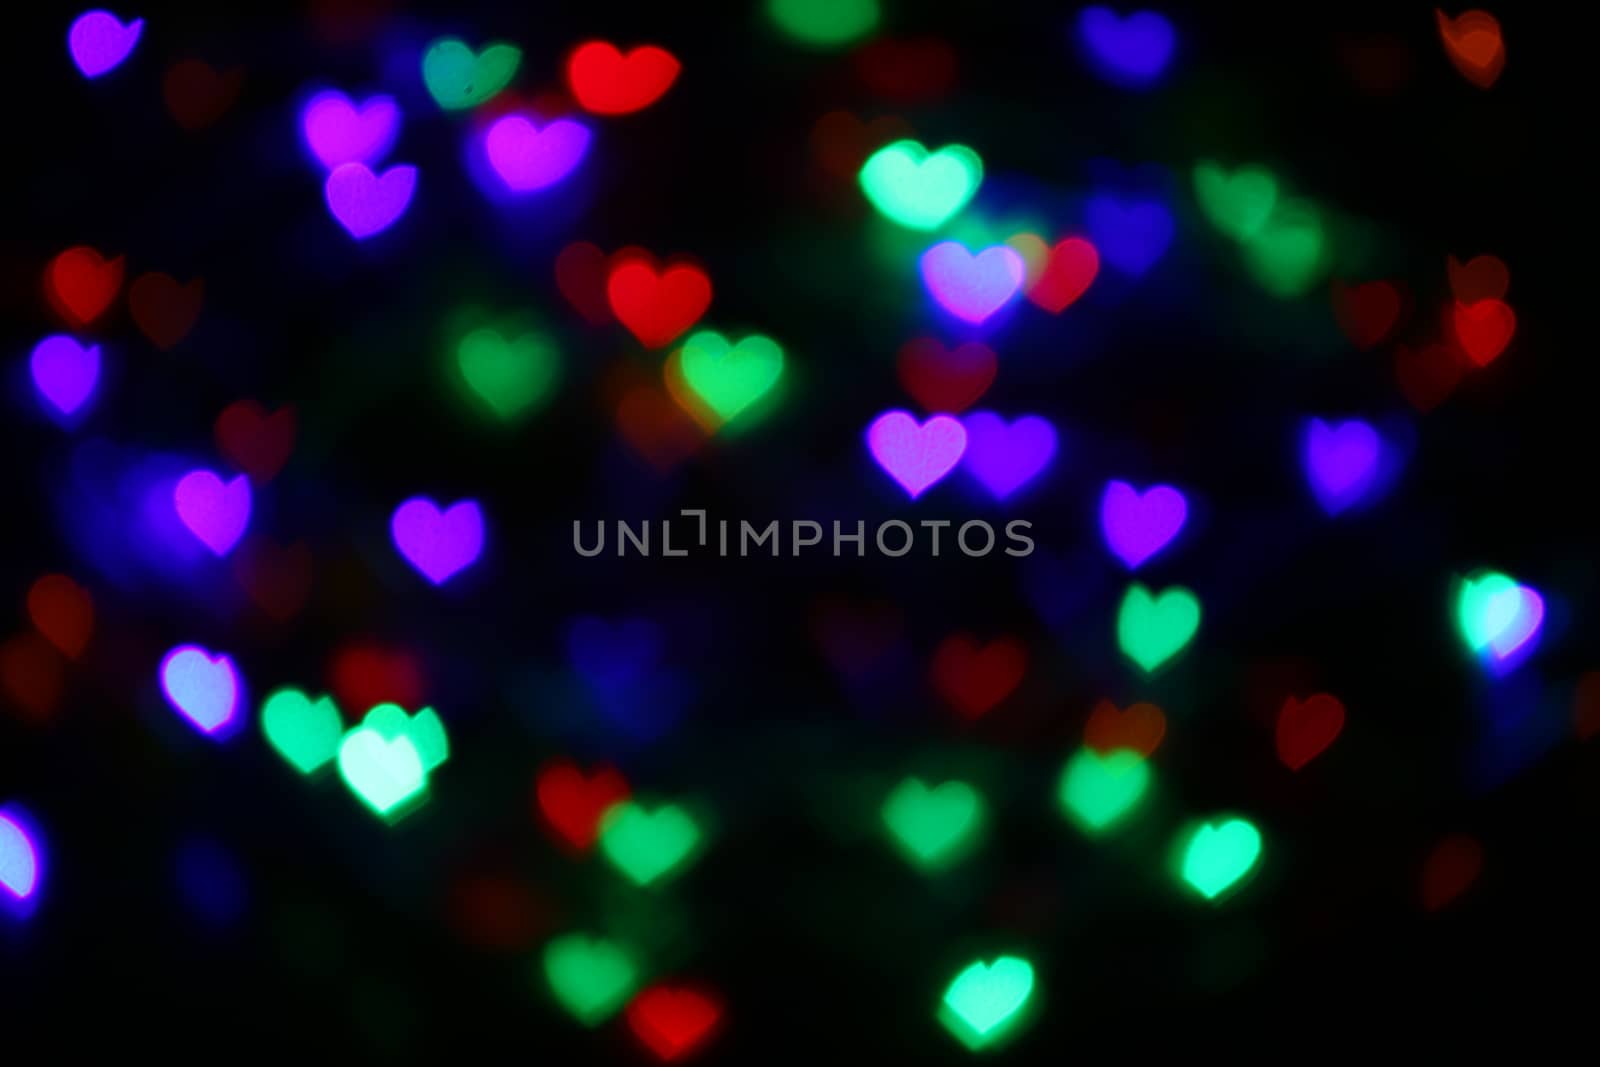 Valentines Colorful heart-shaped bokeh on black background lighting bokeh for decoration at night backdrop wallpaper blur valentine, Love Pictures background, Lighting heart shaped soft night abstract by cgdeaw